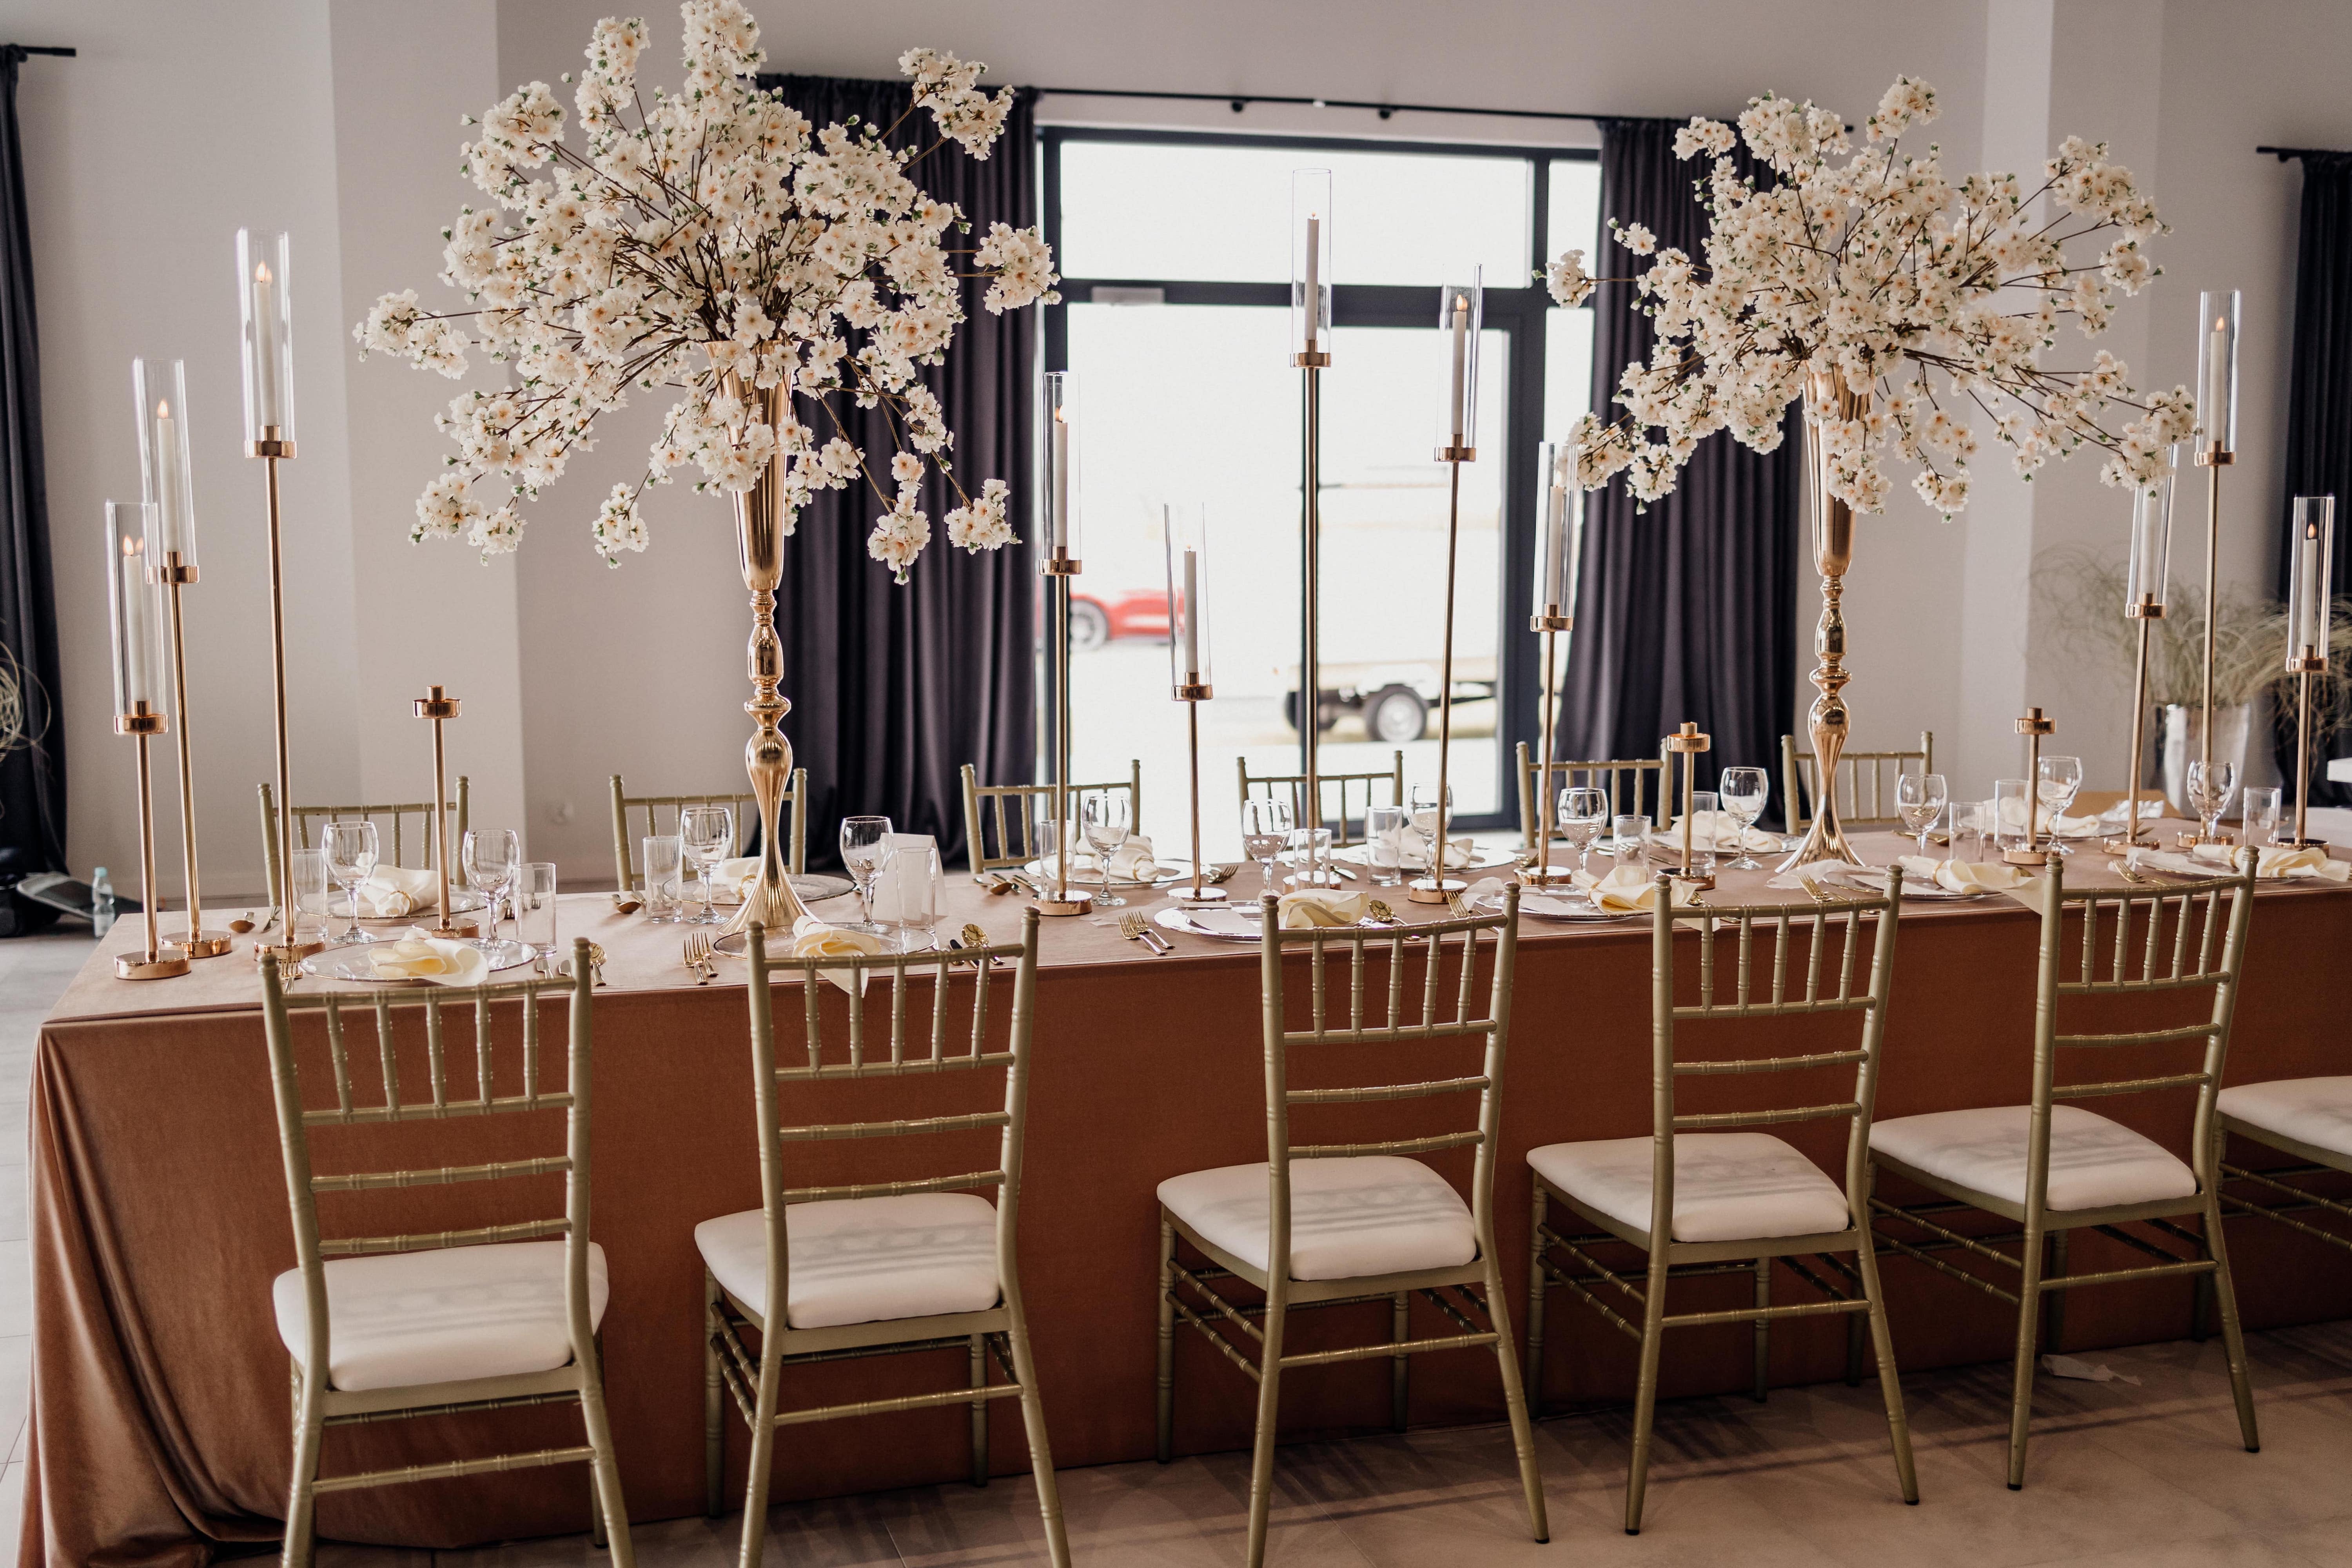 A drcorated wedding room with table and chairs